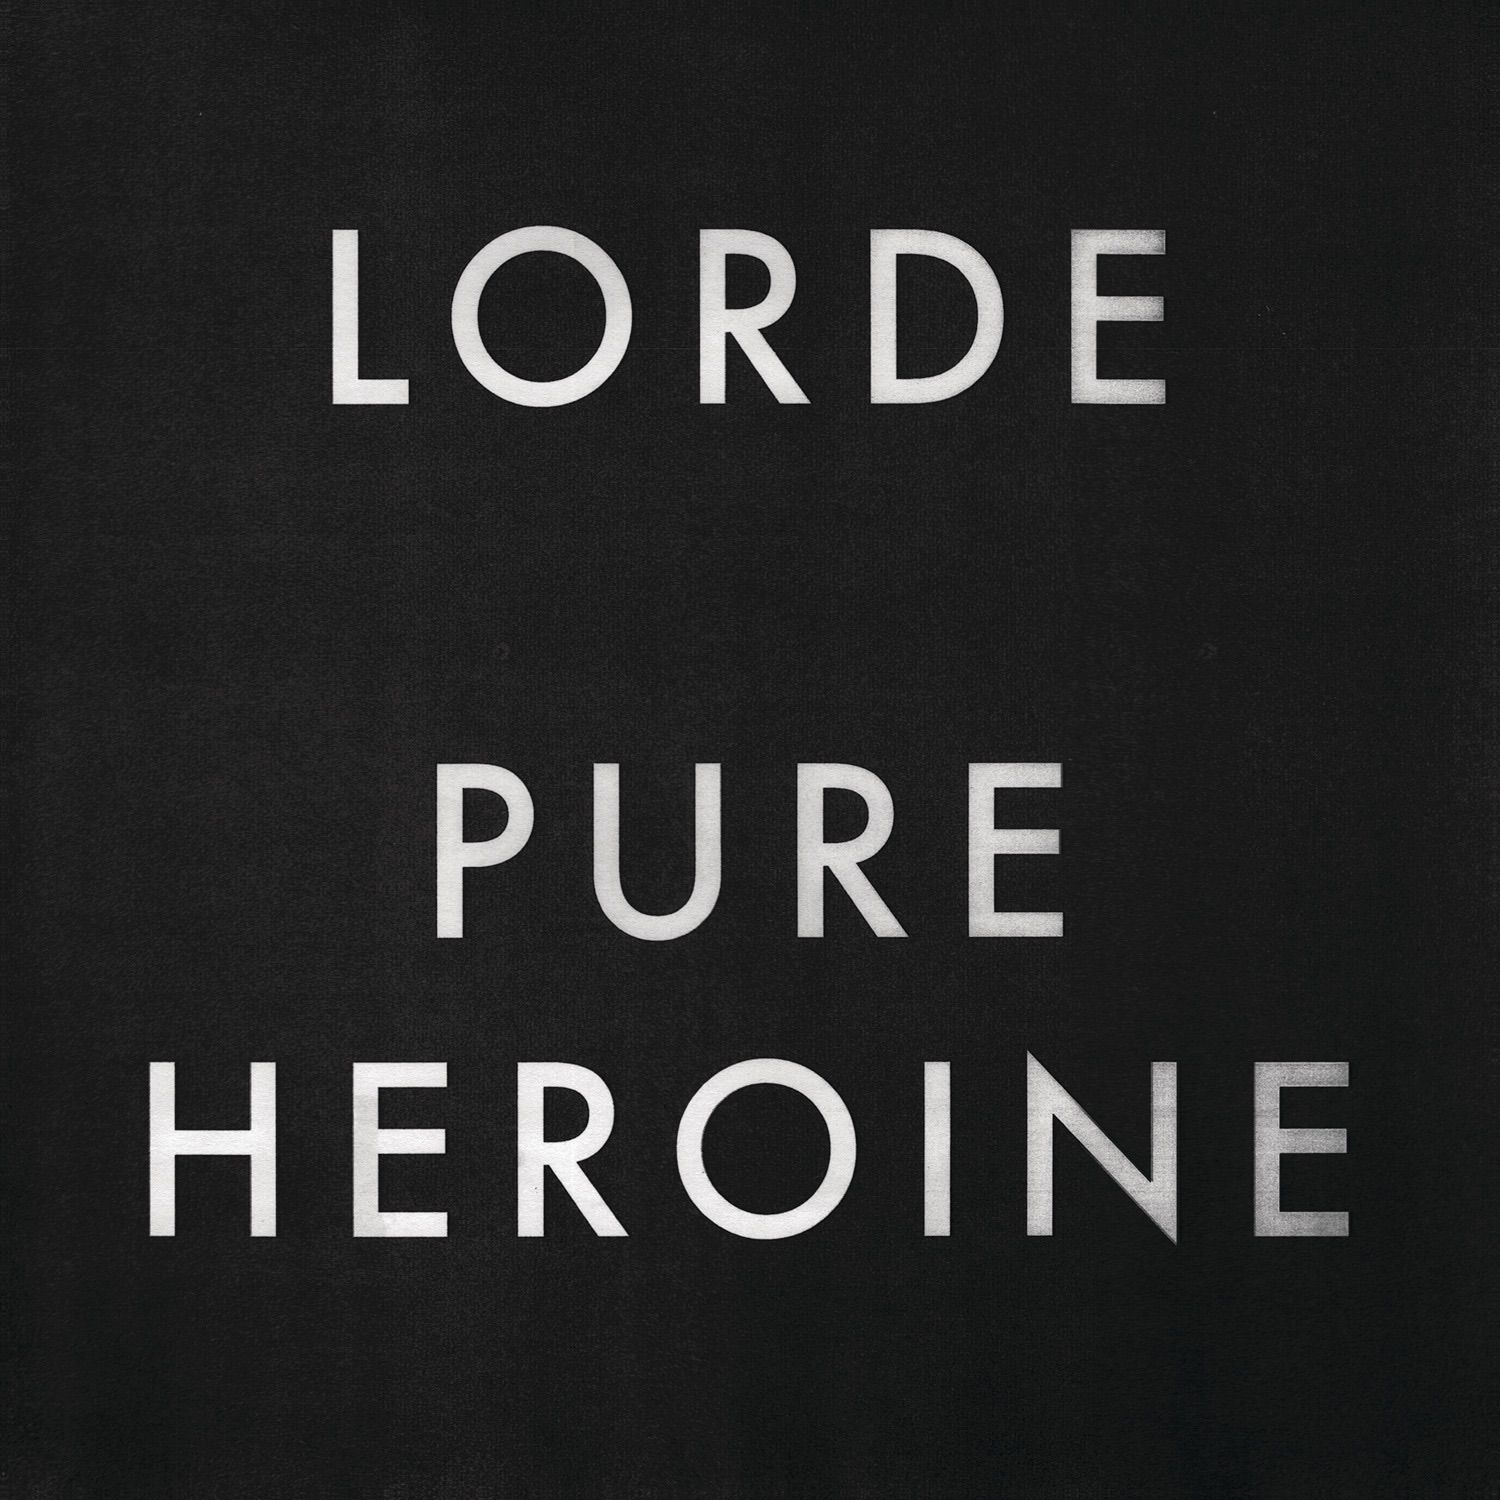 Art for Team by Lorde